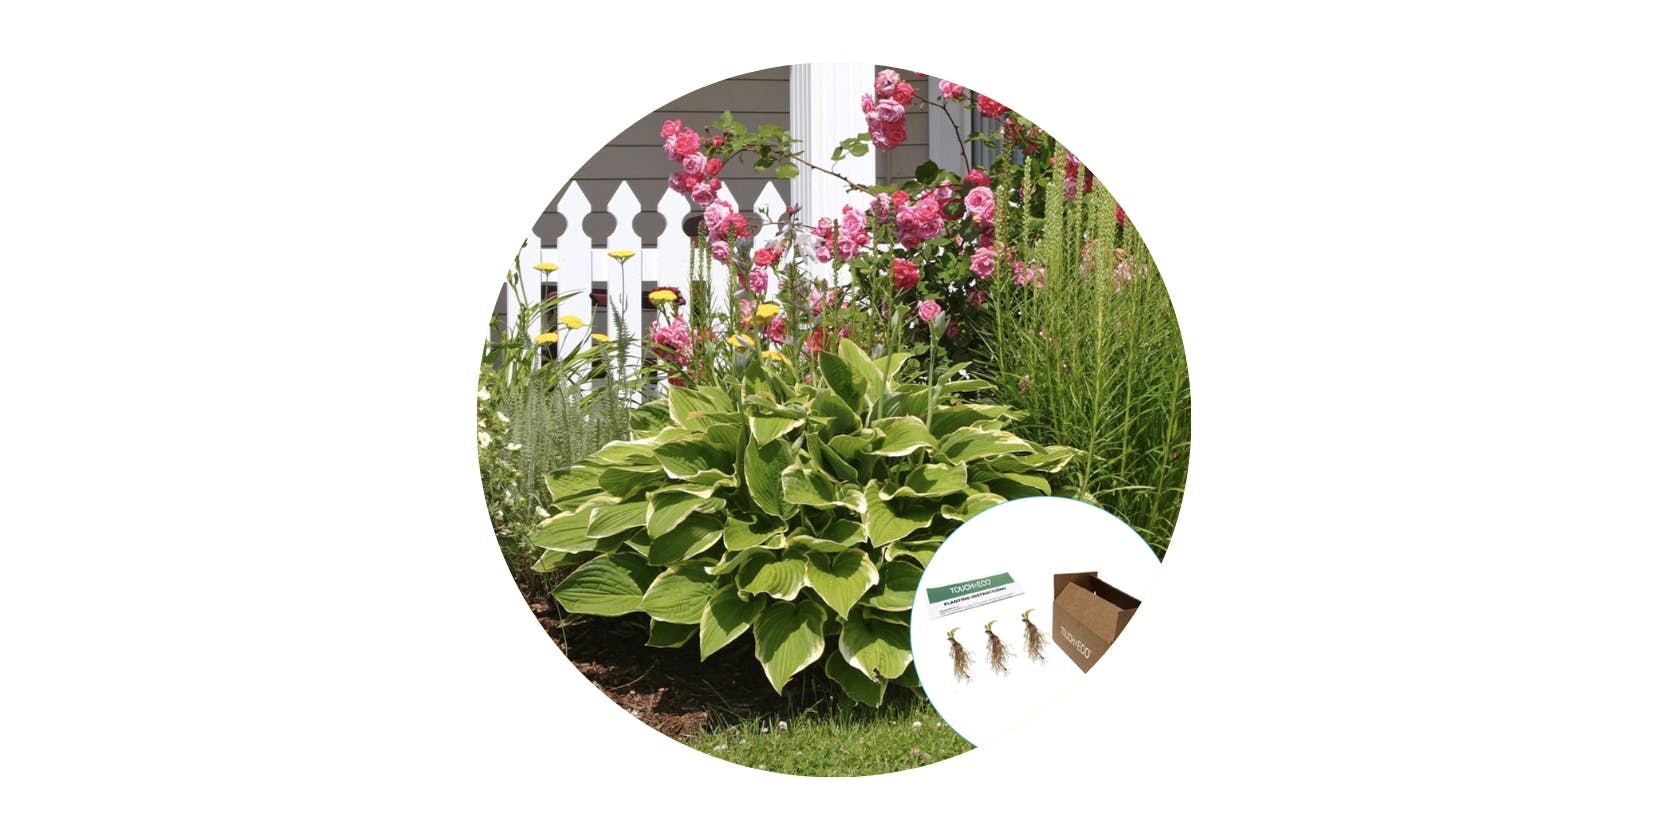 until gone Touch of Eco Hardy Hosta Bare Root Plants featured image 2023